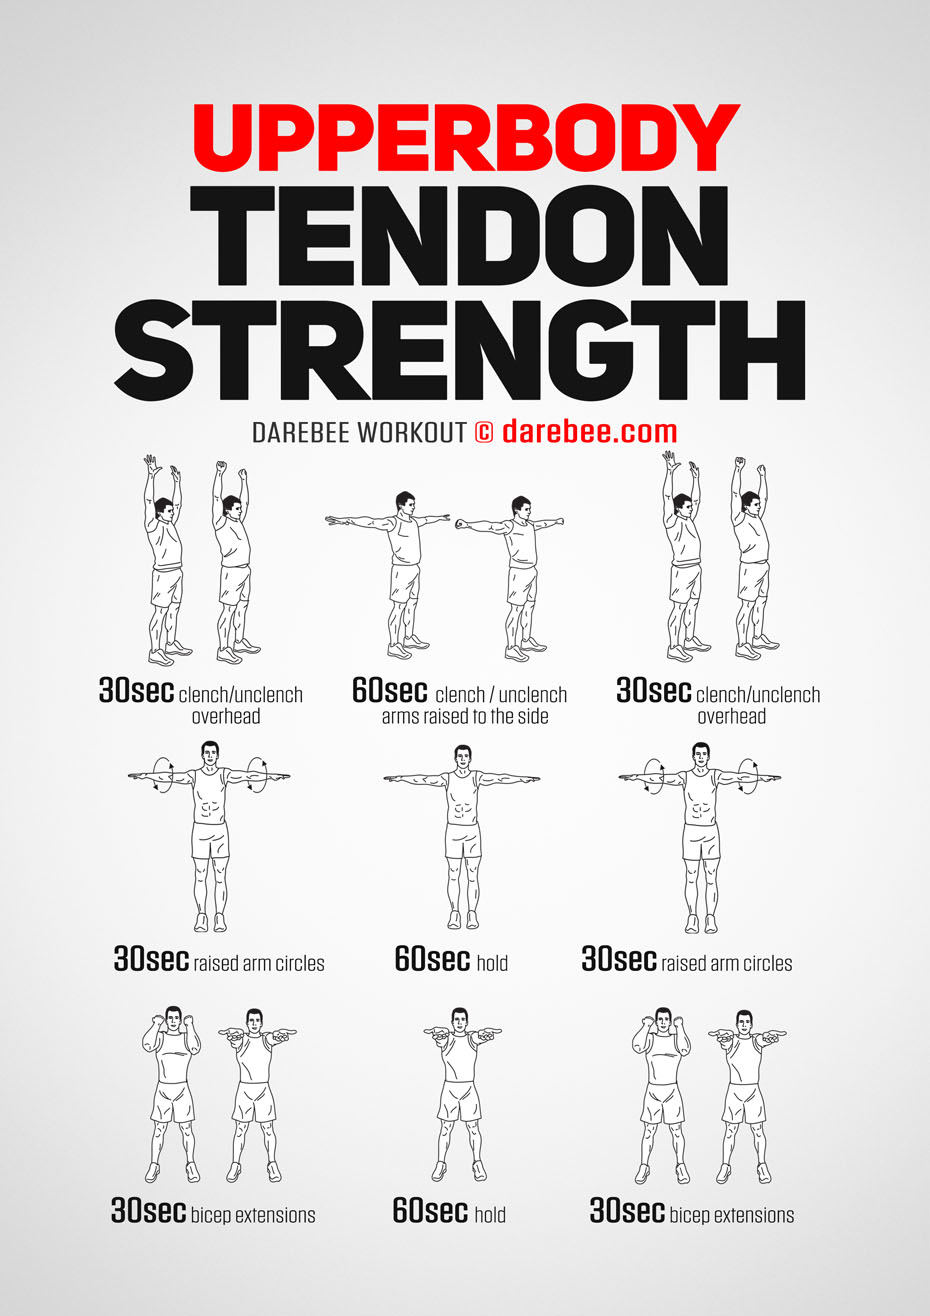 Upperbody Tendon Strength Workout